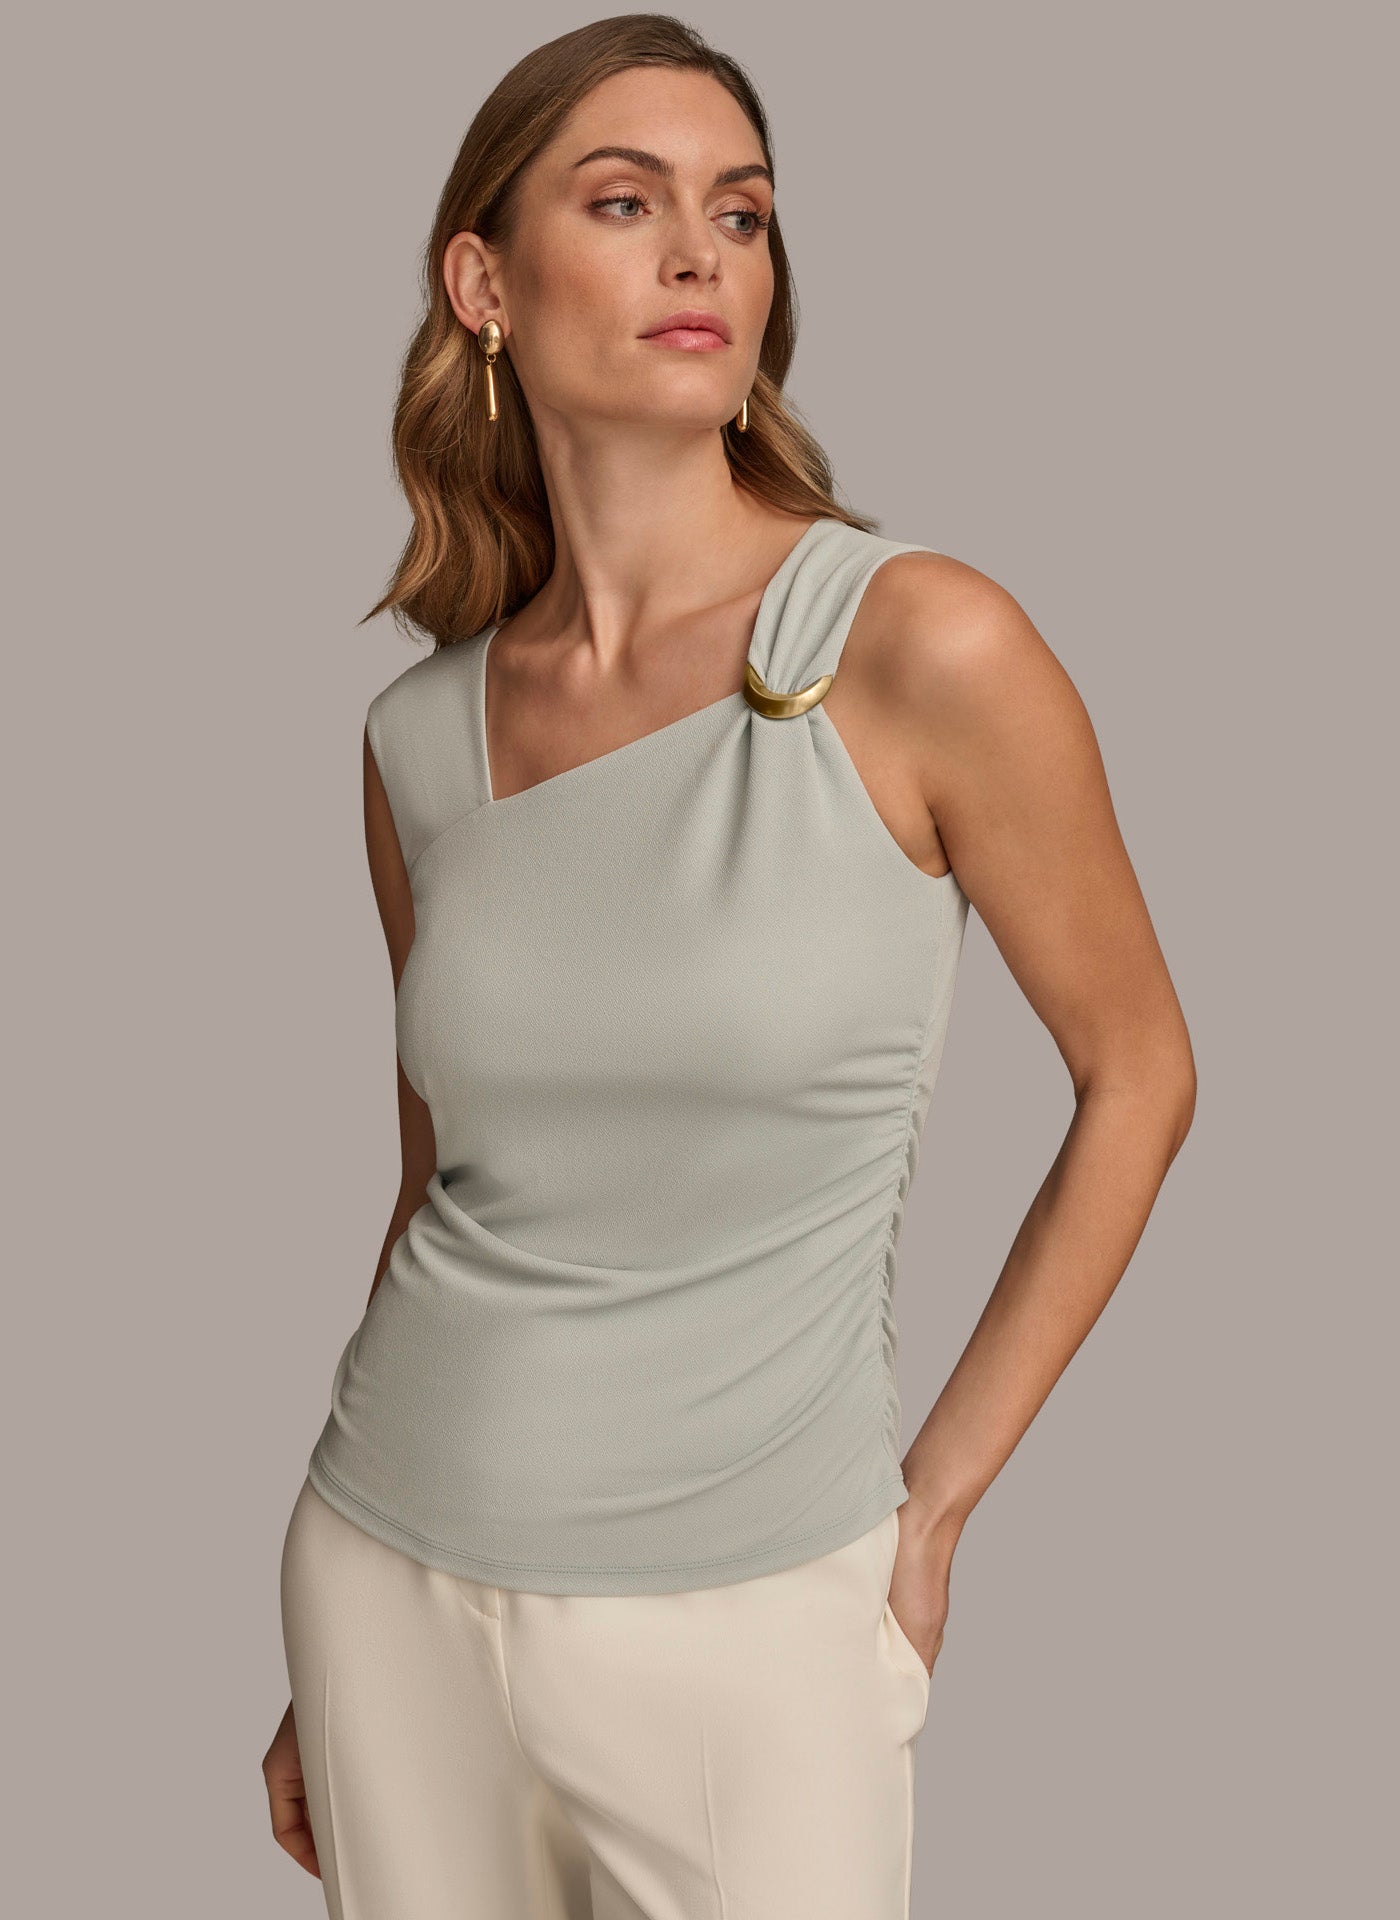 ASYMMETRICAL TOP WITH HARDWARE